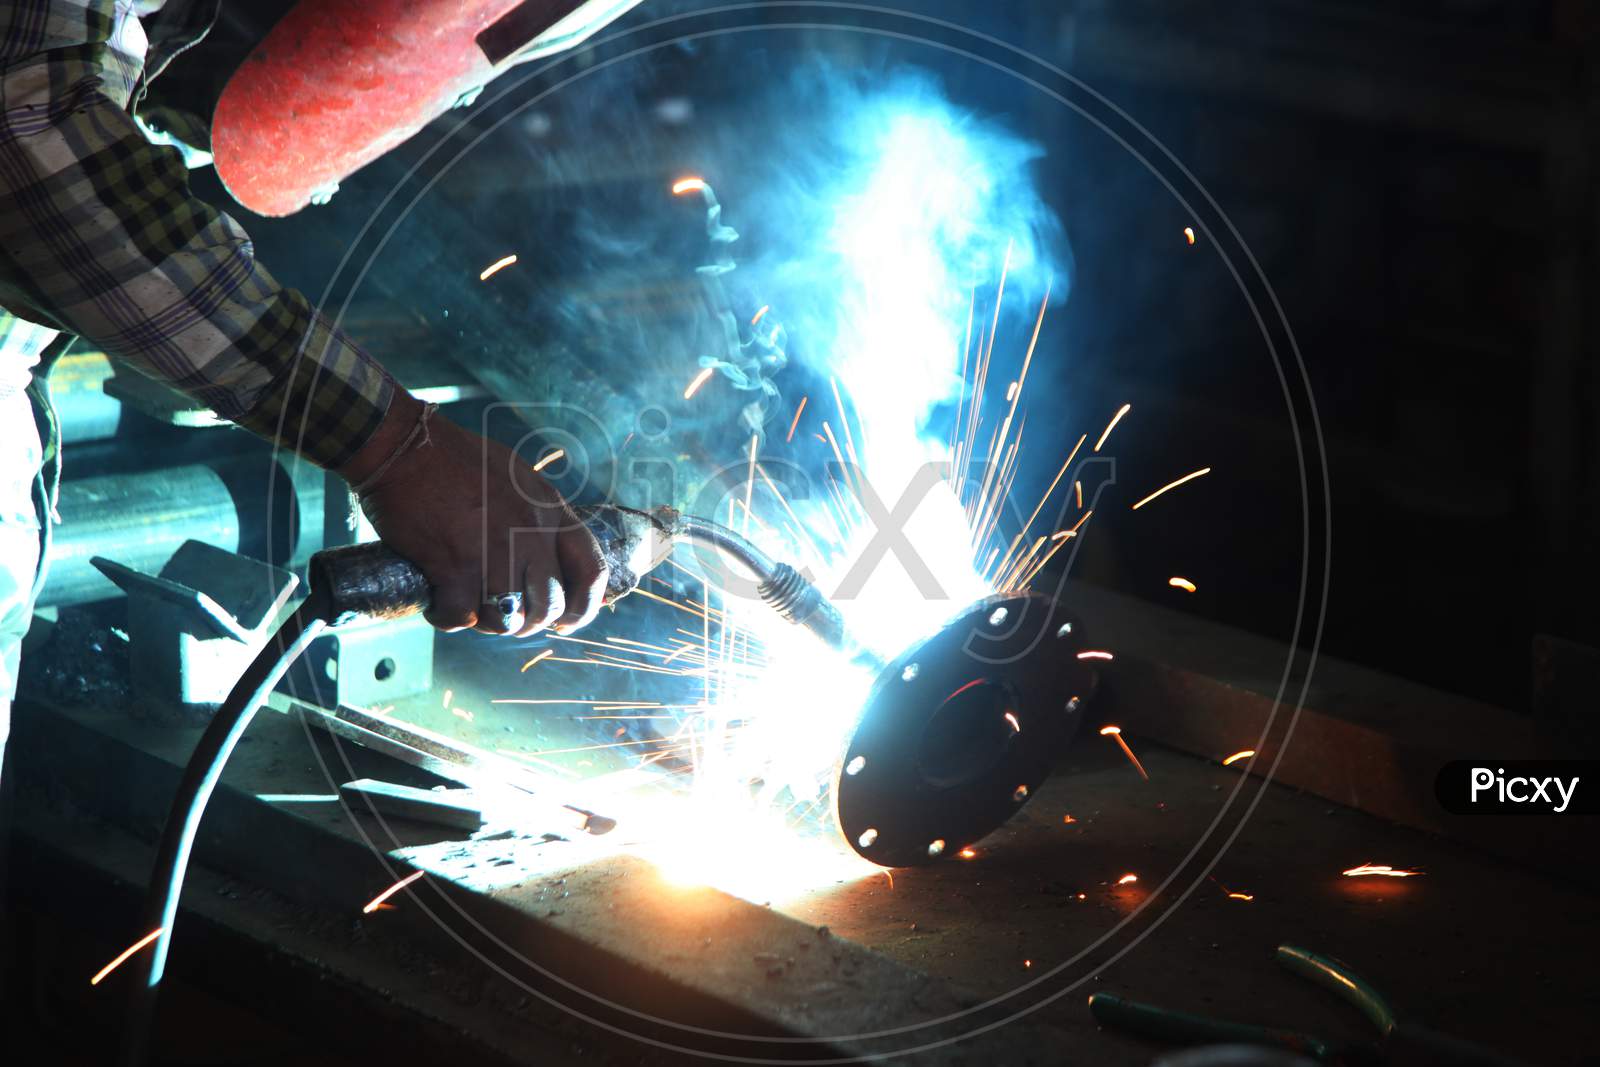 Close up shot of a Person doing Welding